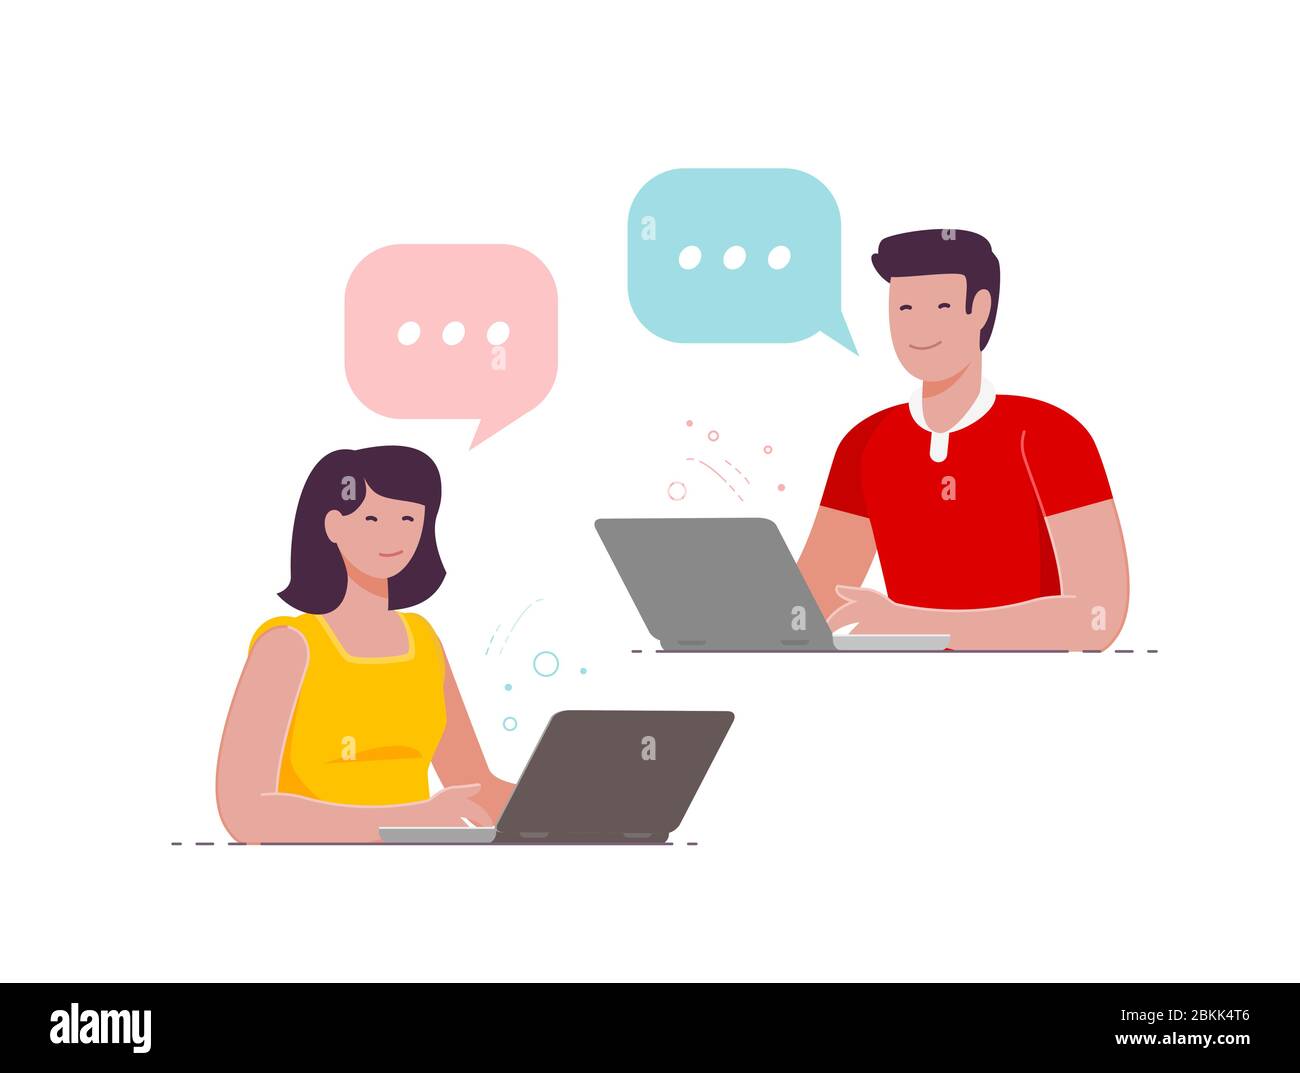 People communicate over internet using computer. Vector illustration Stock Vector